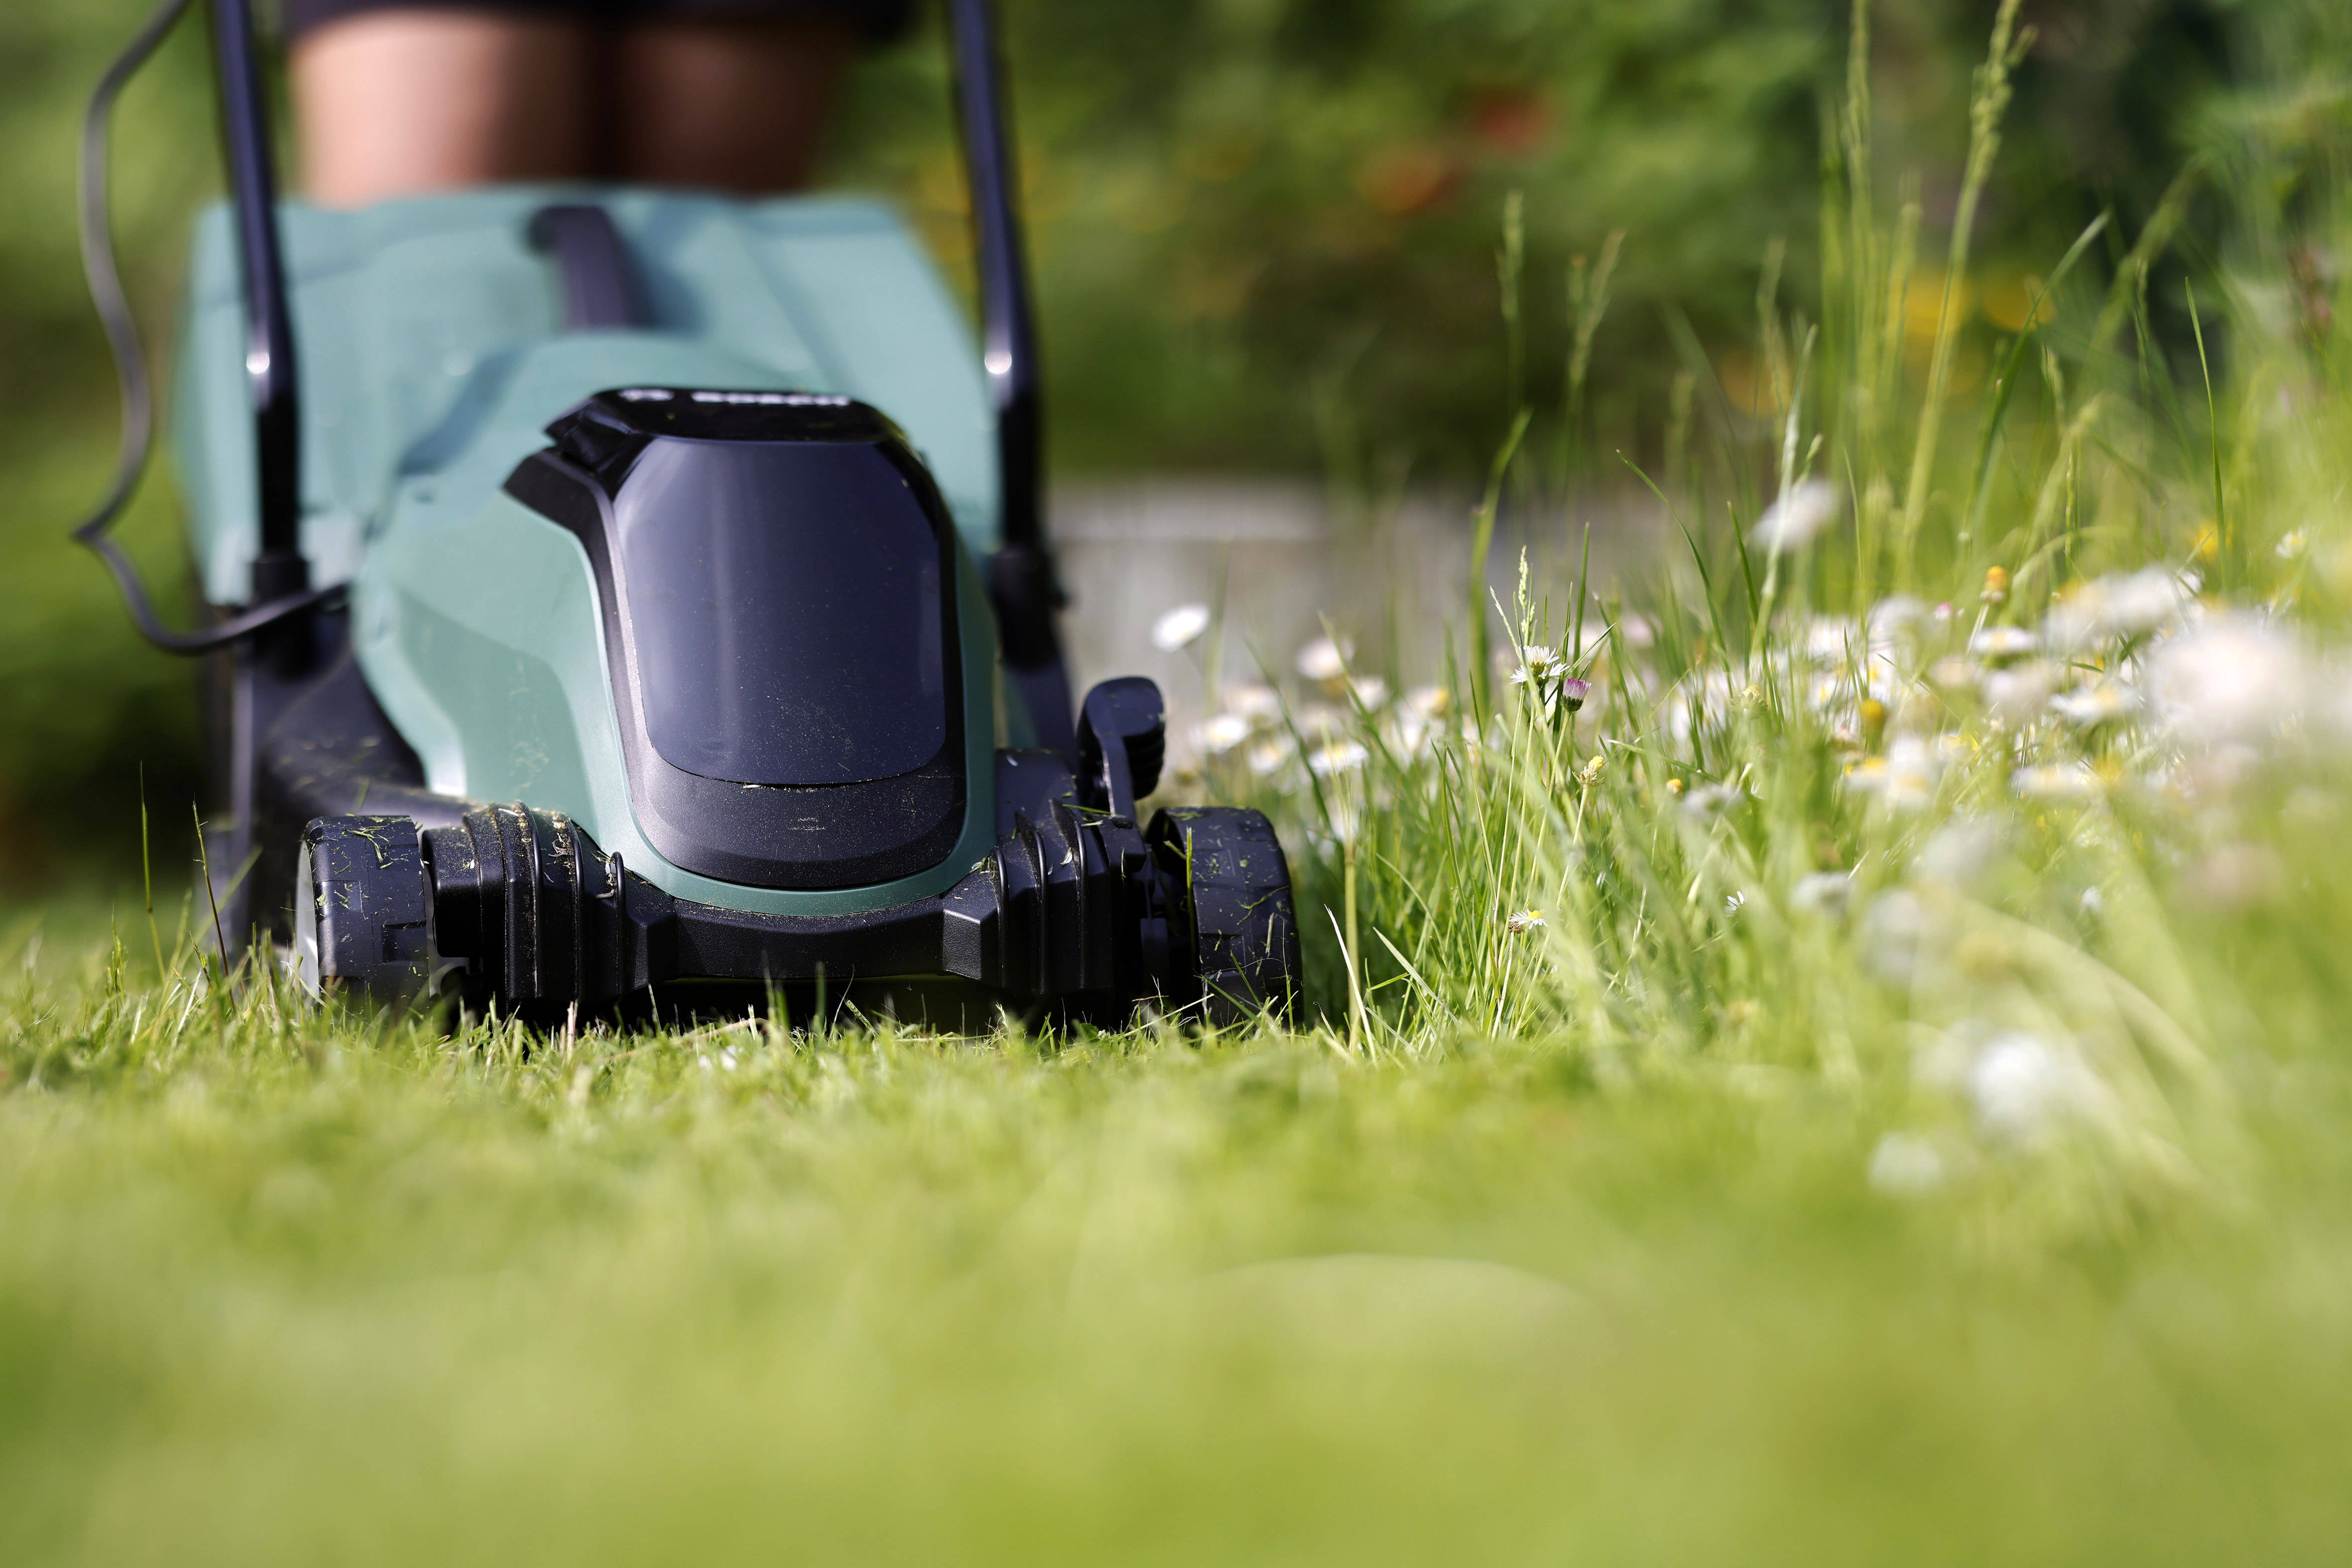 Garden: Mow the lawn with a glass bottle as insect protection